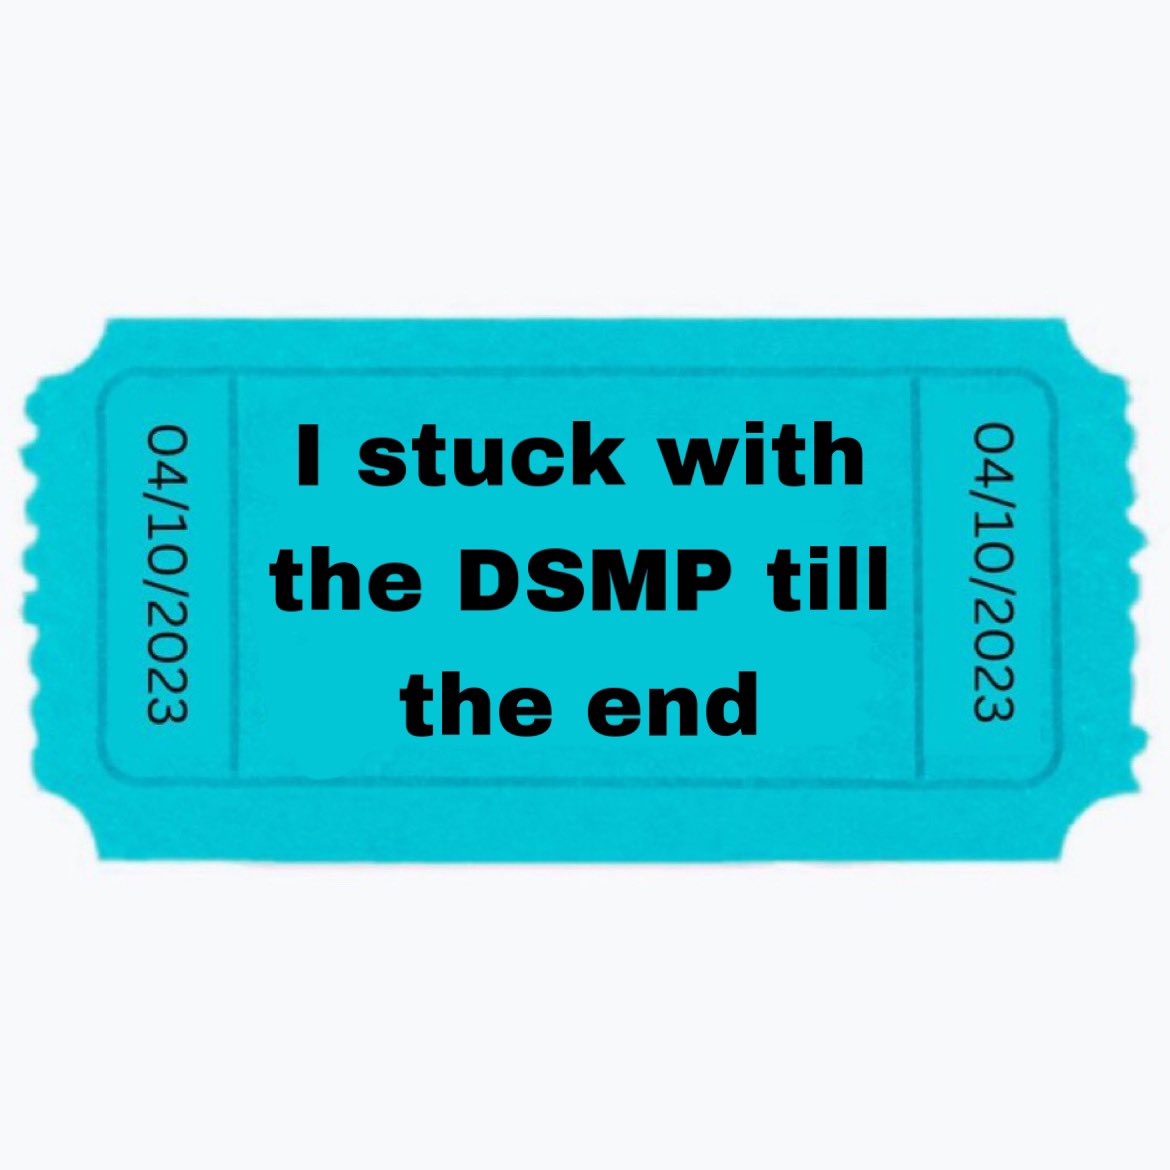 the ticket that matters the most : i stuck with the DSMP till the end 😞 claim it now !!